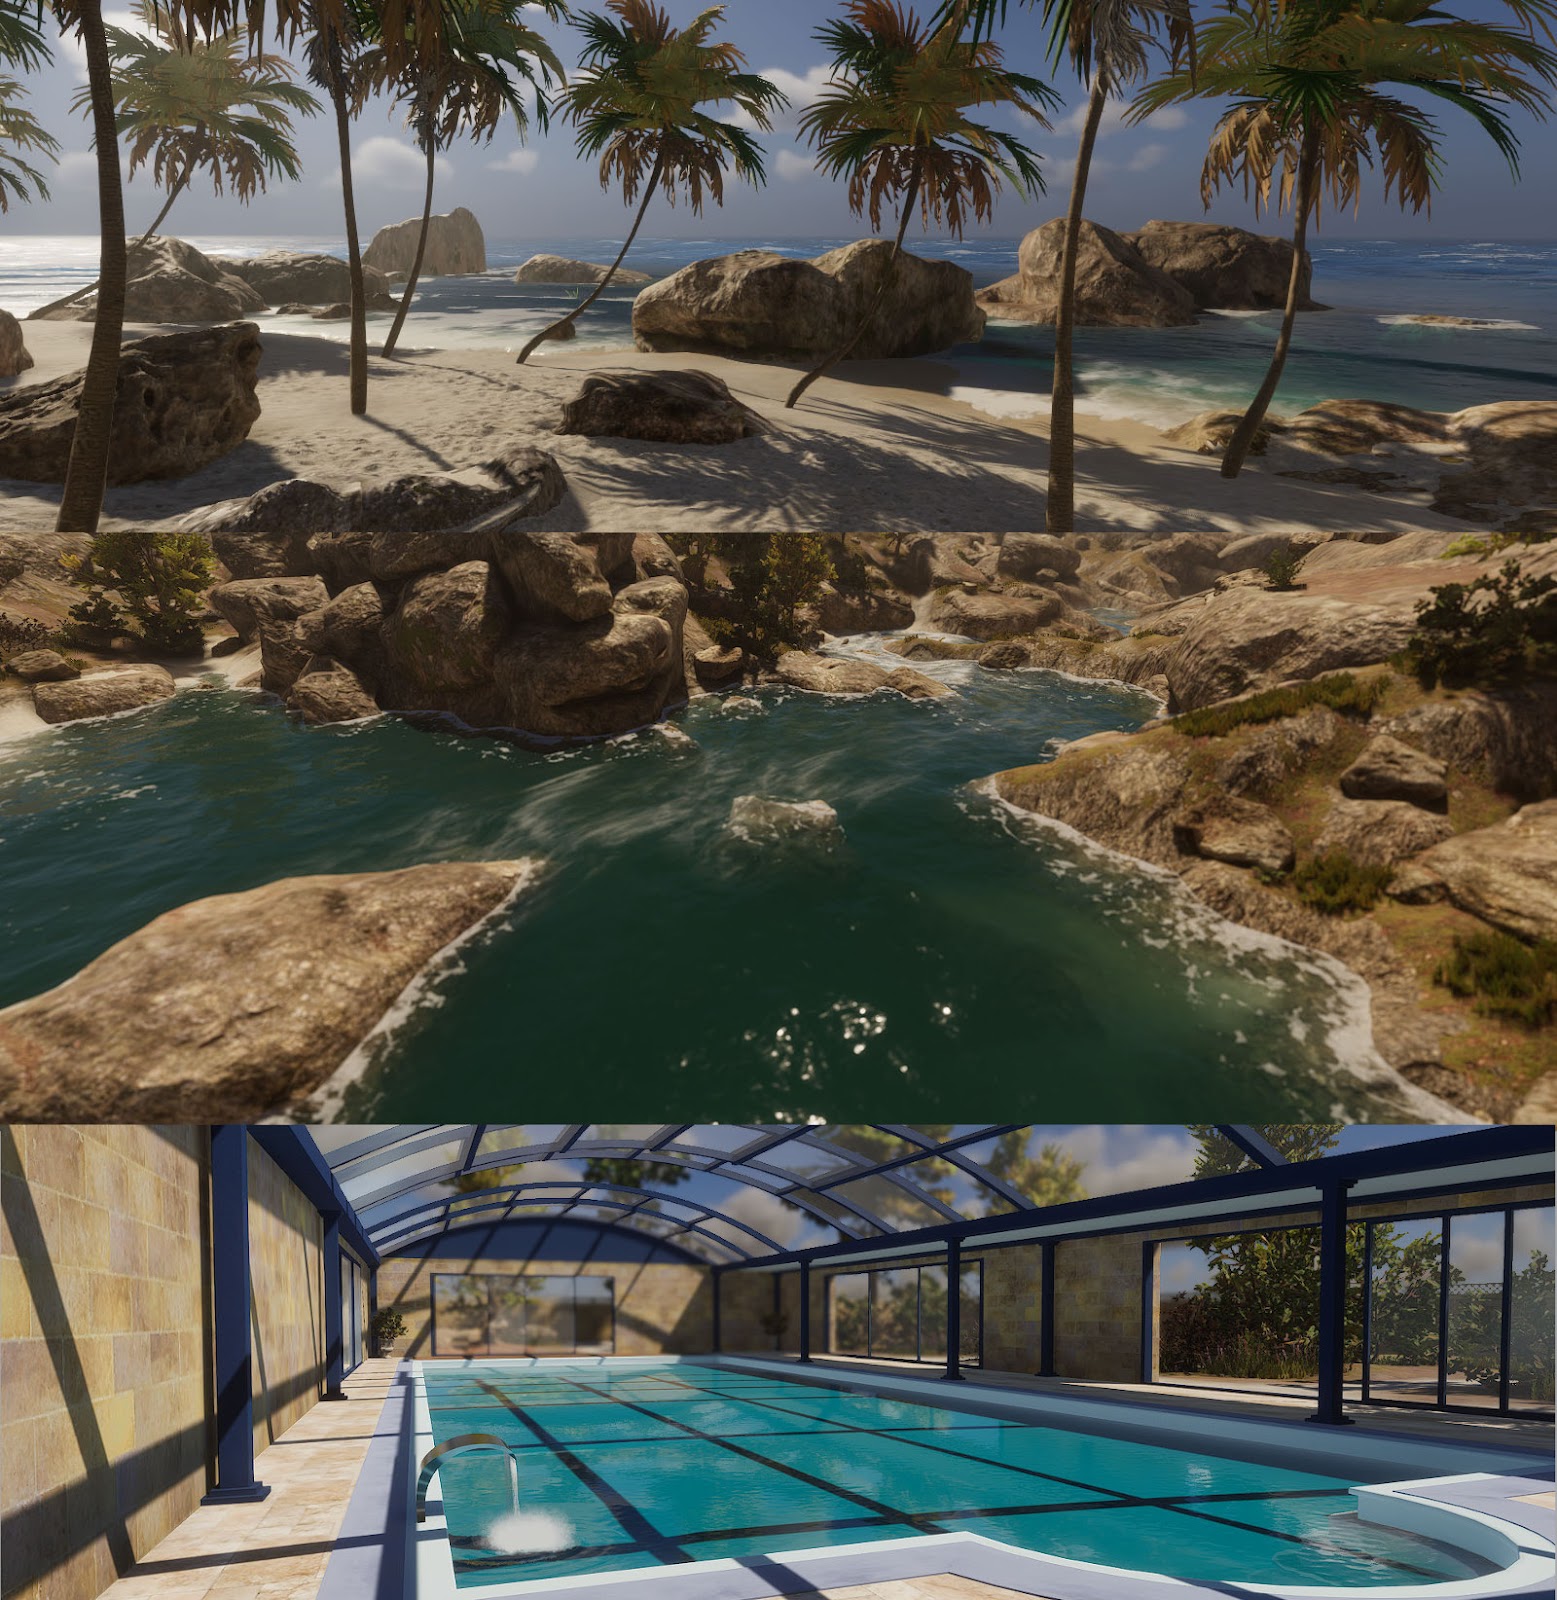 Create oceans, rivers, and pools with physically based rendering and real-time simulation